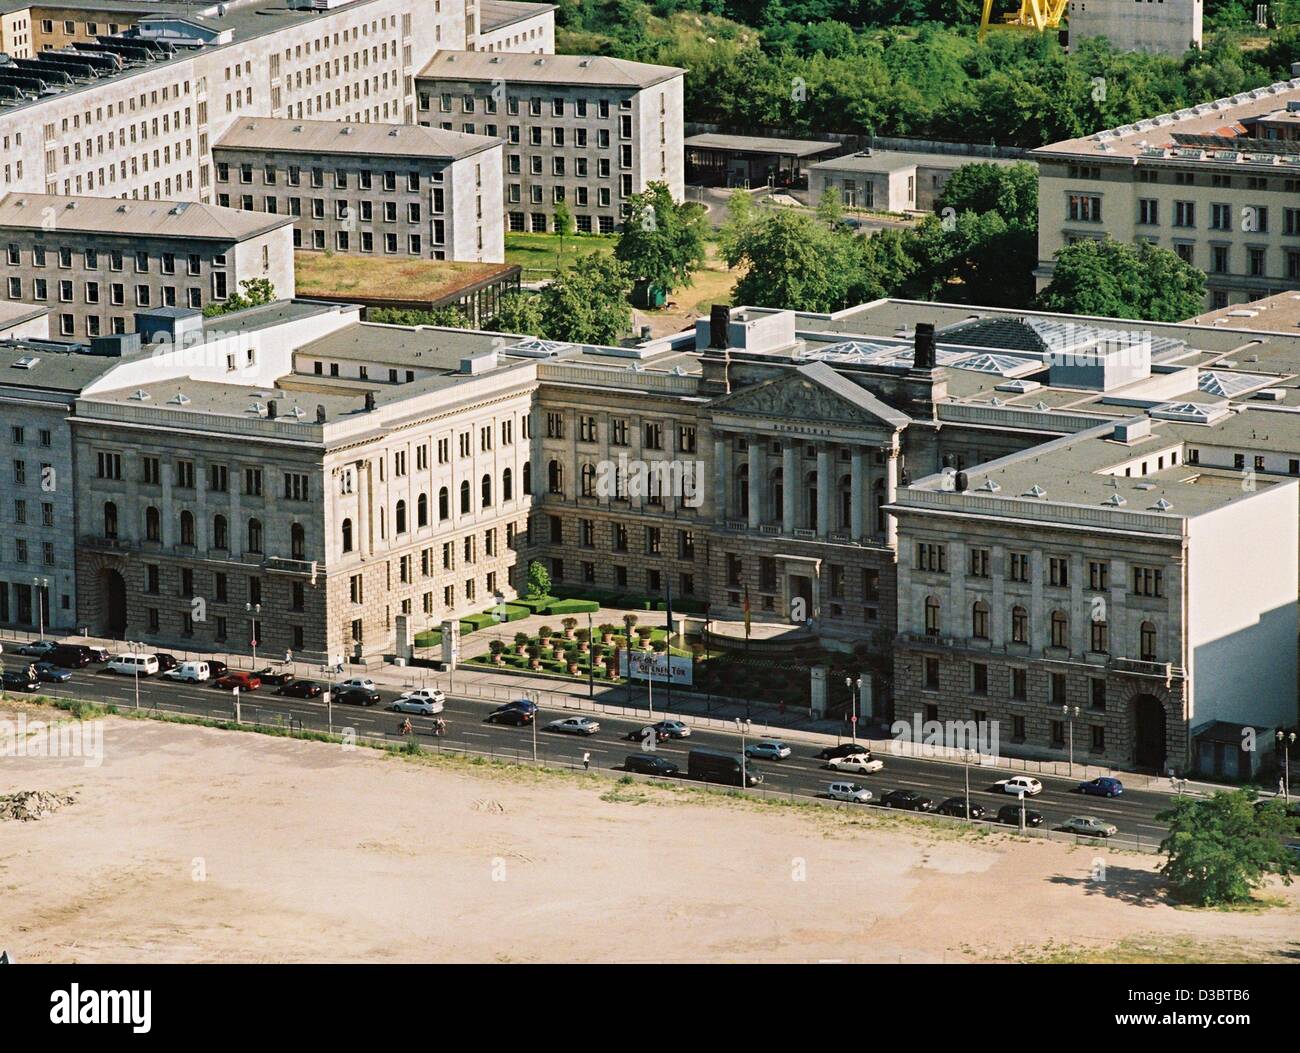 (dpa) - A view of the building of the Federal Council, the upper house of the German parliament, in Leipziger Strasse (Leipzig street) in Berlin, 17 June 2003. Stock Photo